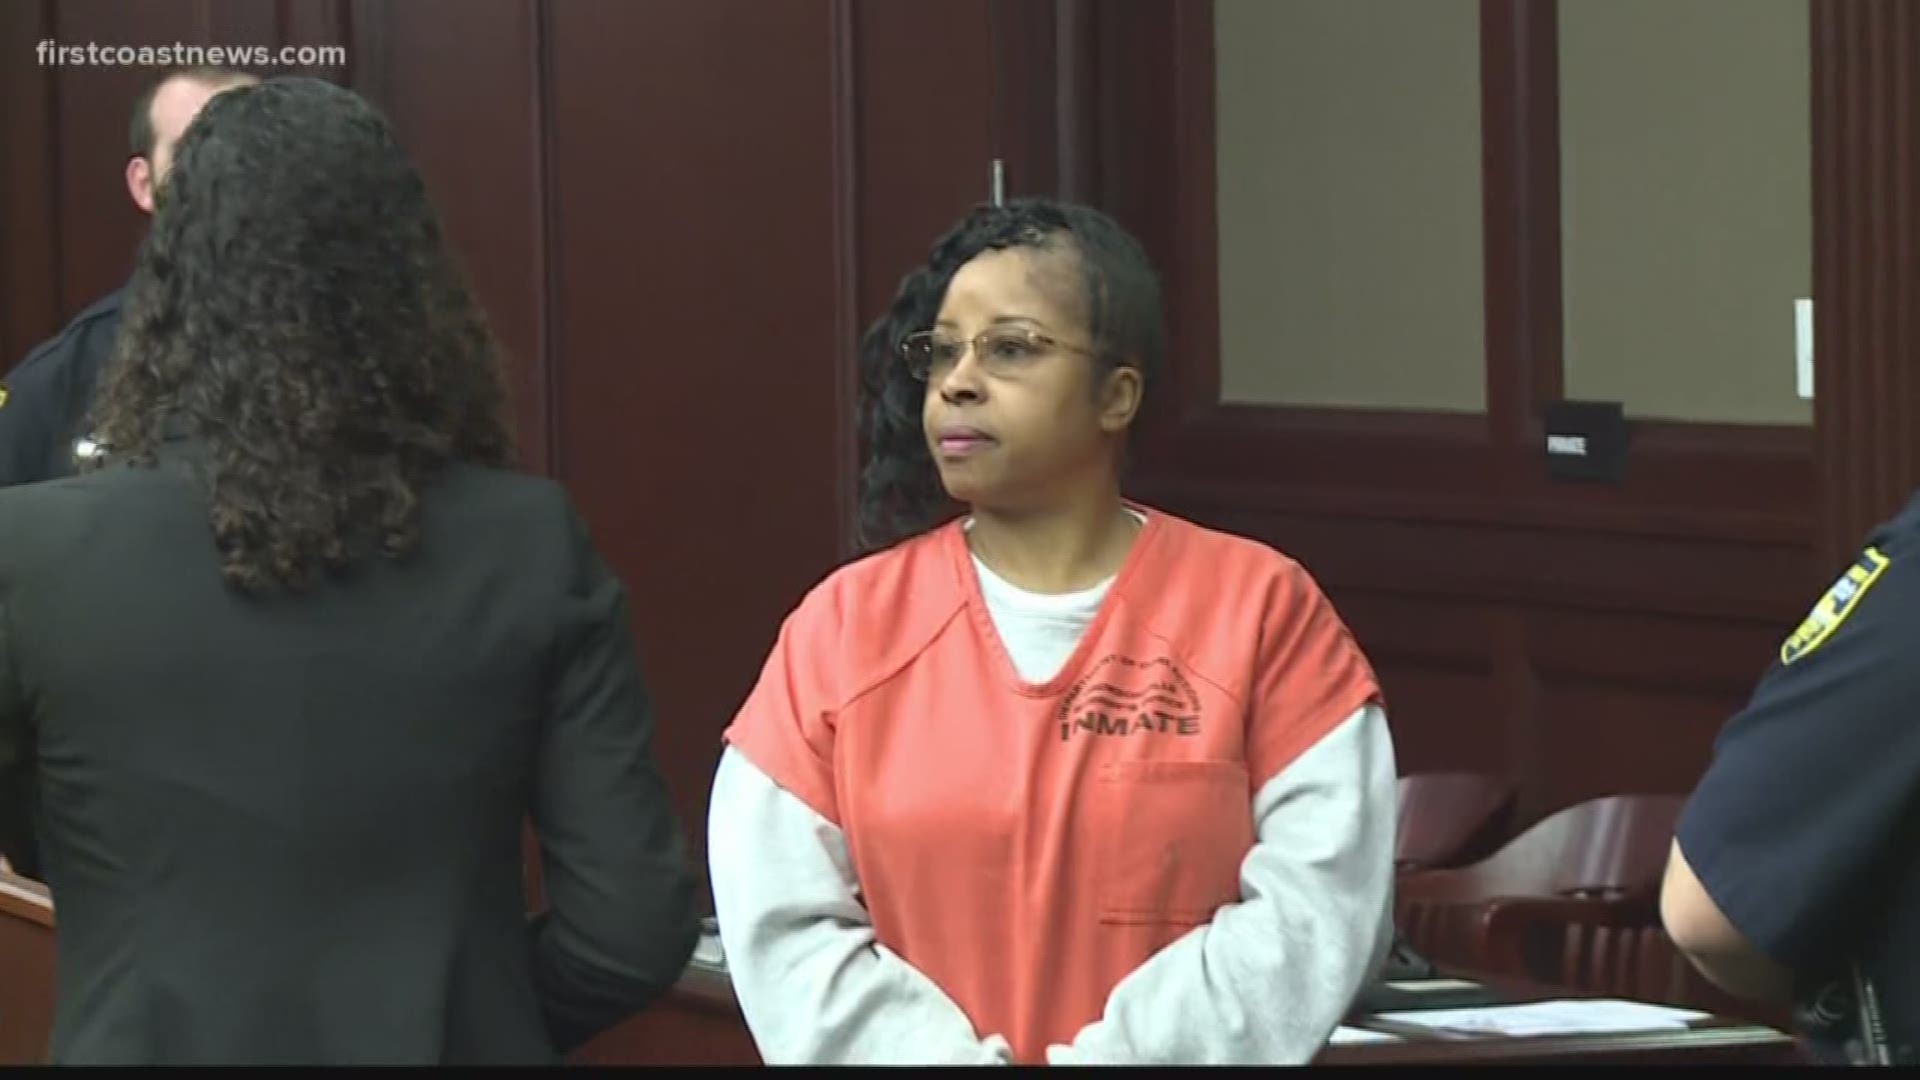 Gloria Williams pleaded guilty to kidnapping Kamiyah Mobley from a Jacksonville hospital when she was an infant in 1998. On Friday, she took the stand during her sentencing hearing for those crimes. She painted the picture of a life with the daughter she